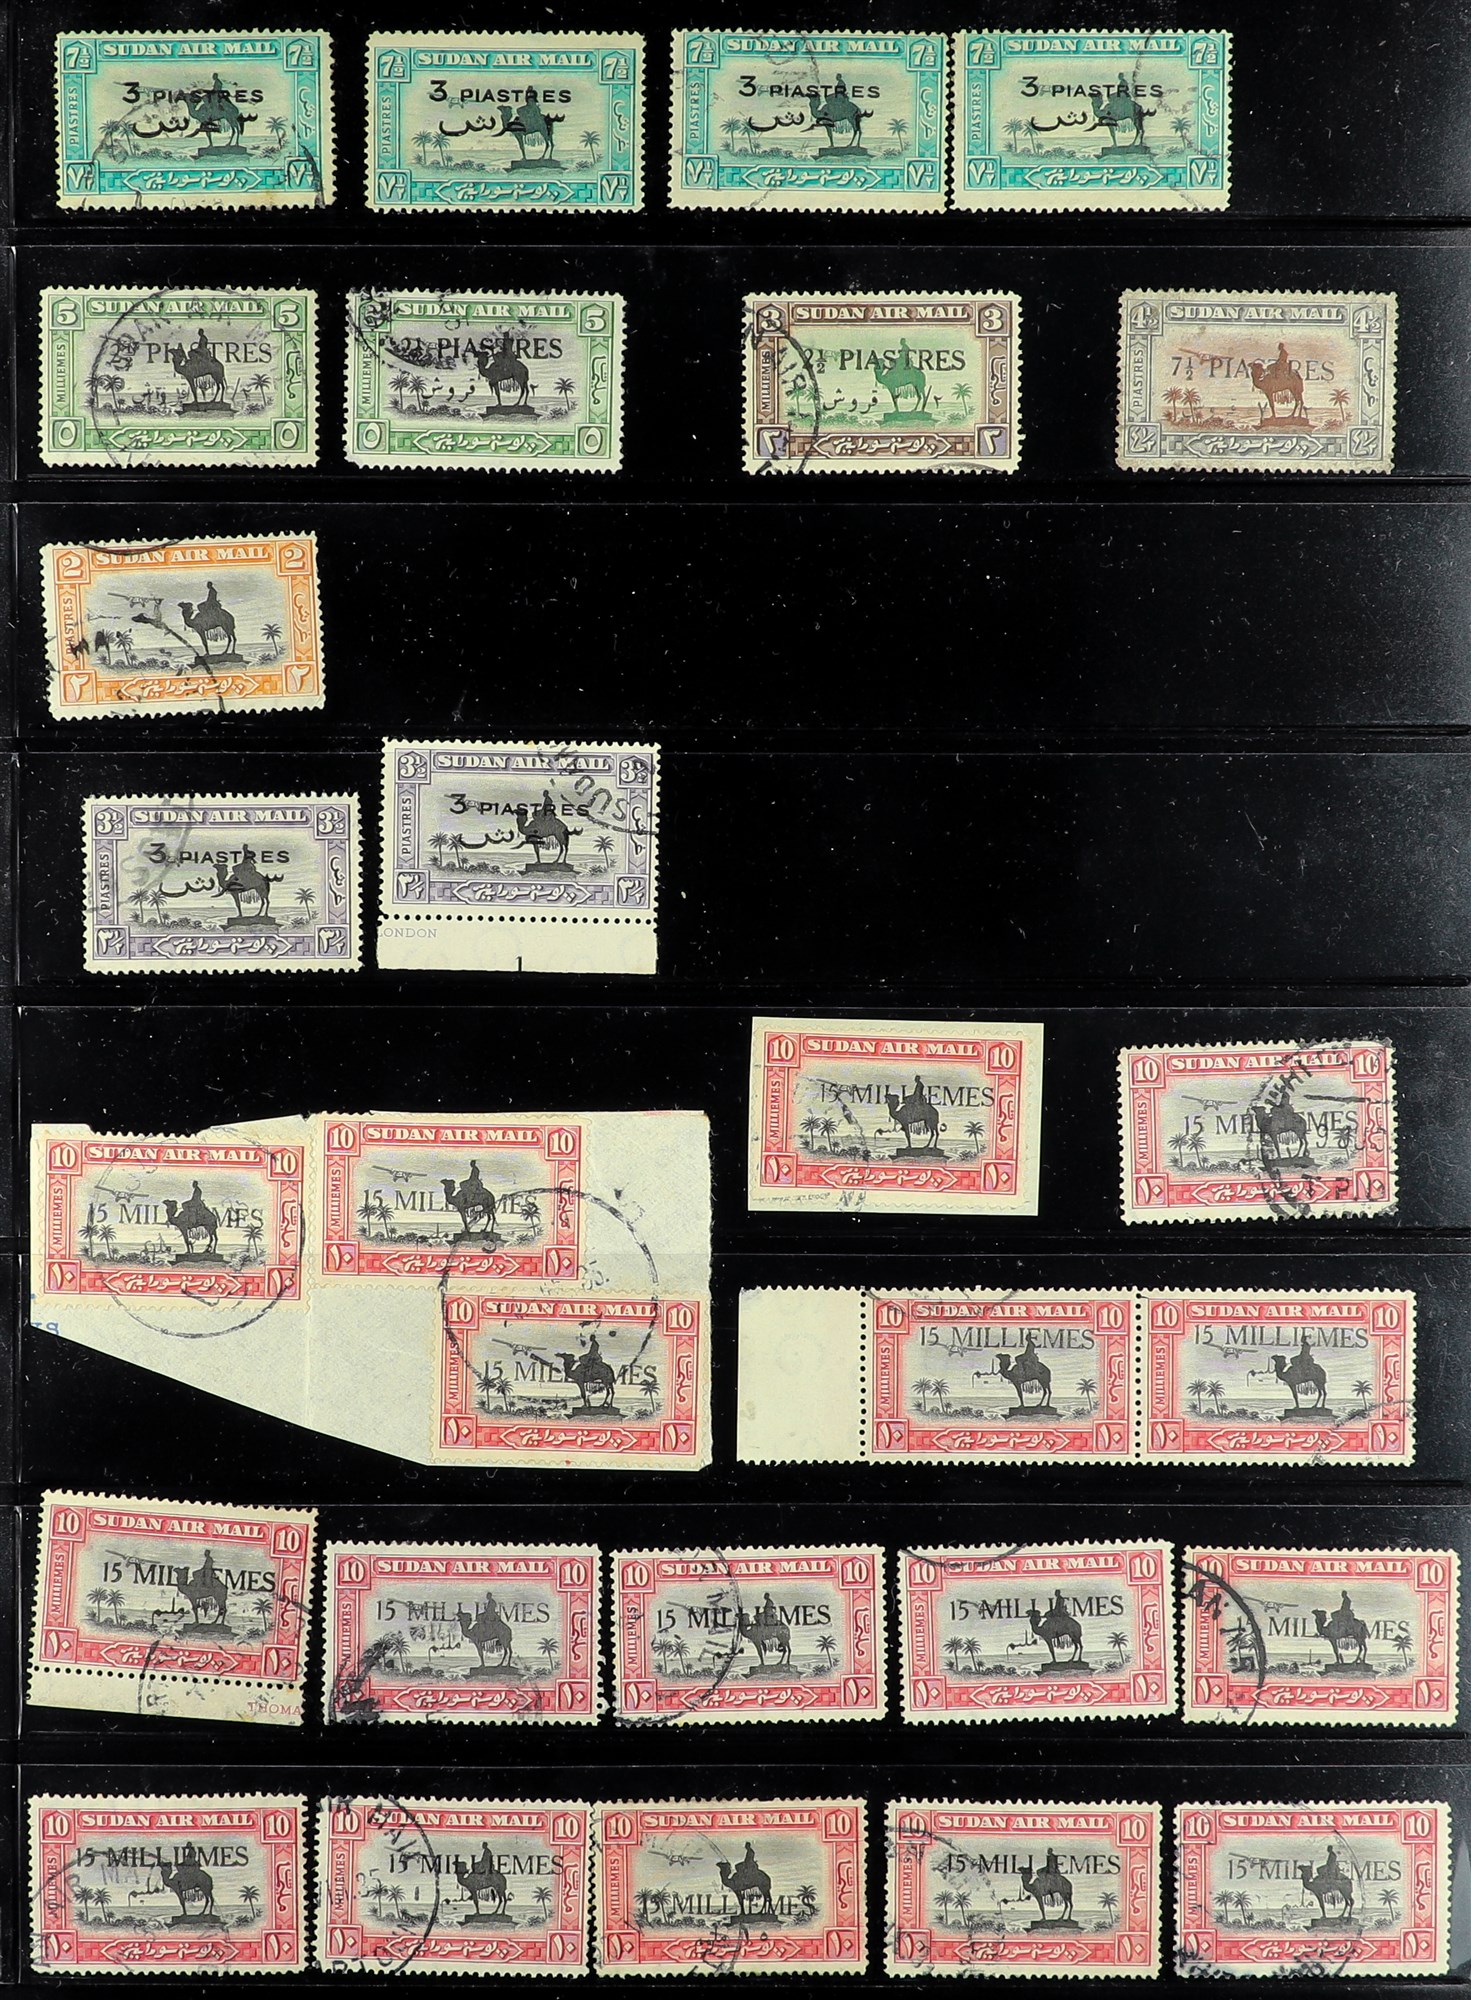 SUDAN 1898 - 1954 SPECIALISED USED RANGES IN 5 ALBUMS. Around 12,000 used stamps with many - Image 17 of 41